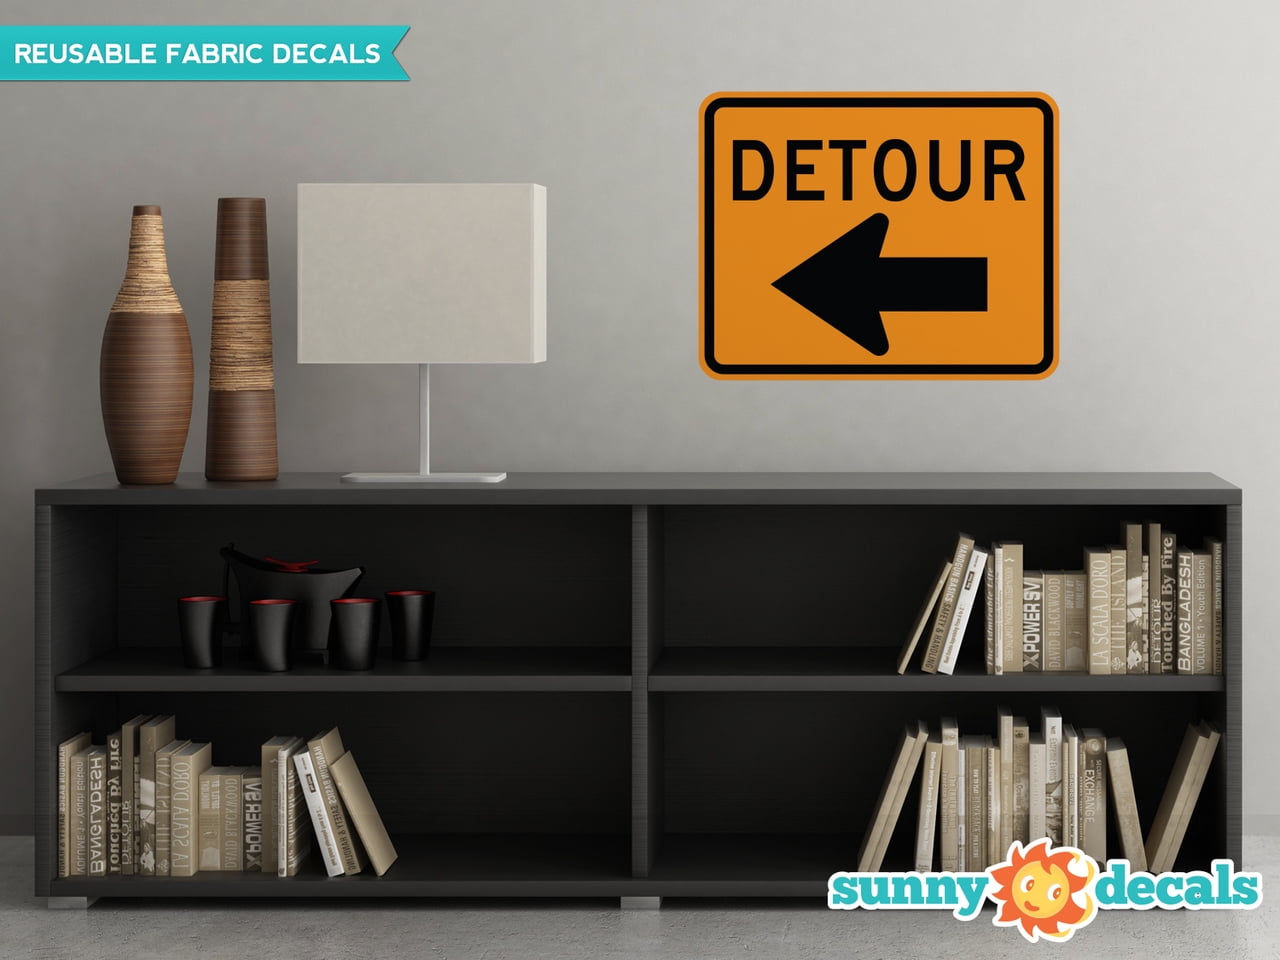 Traffic and Street Signs Detour Sign Fabric Wall Decal 3 Sizes Available